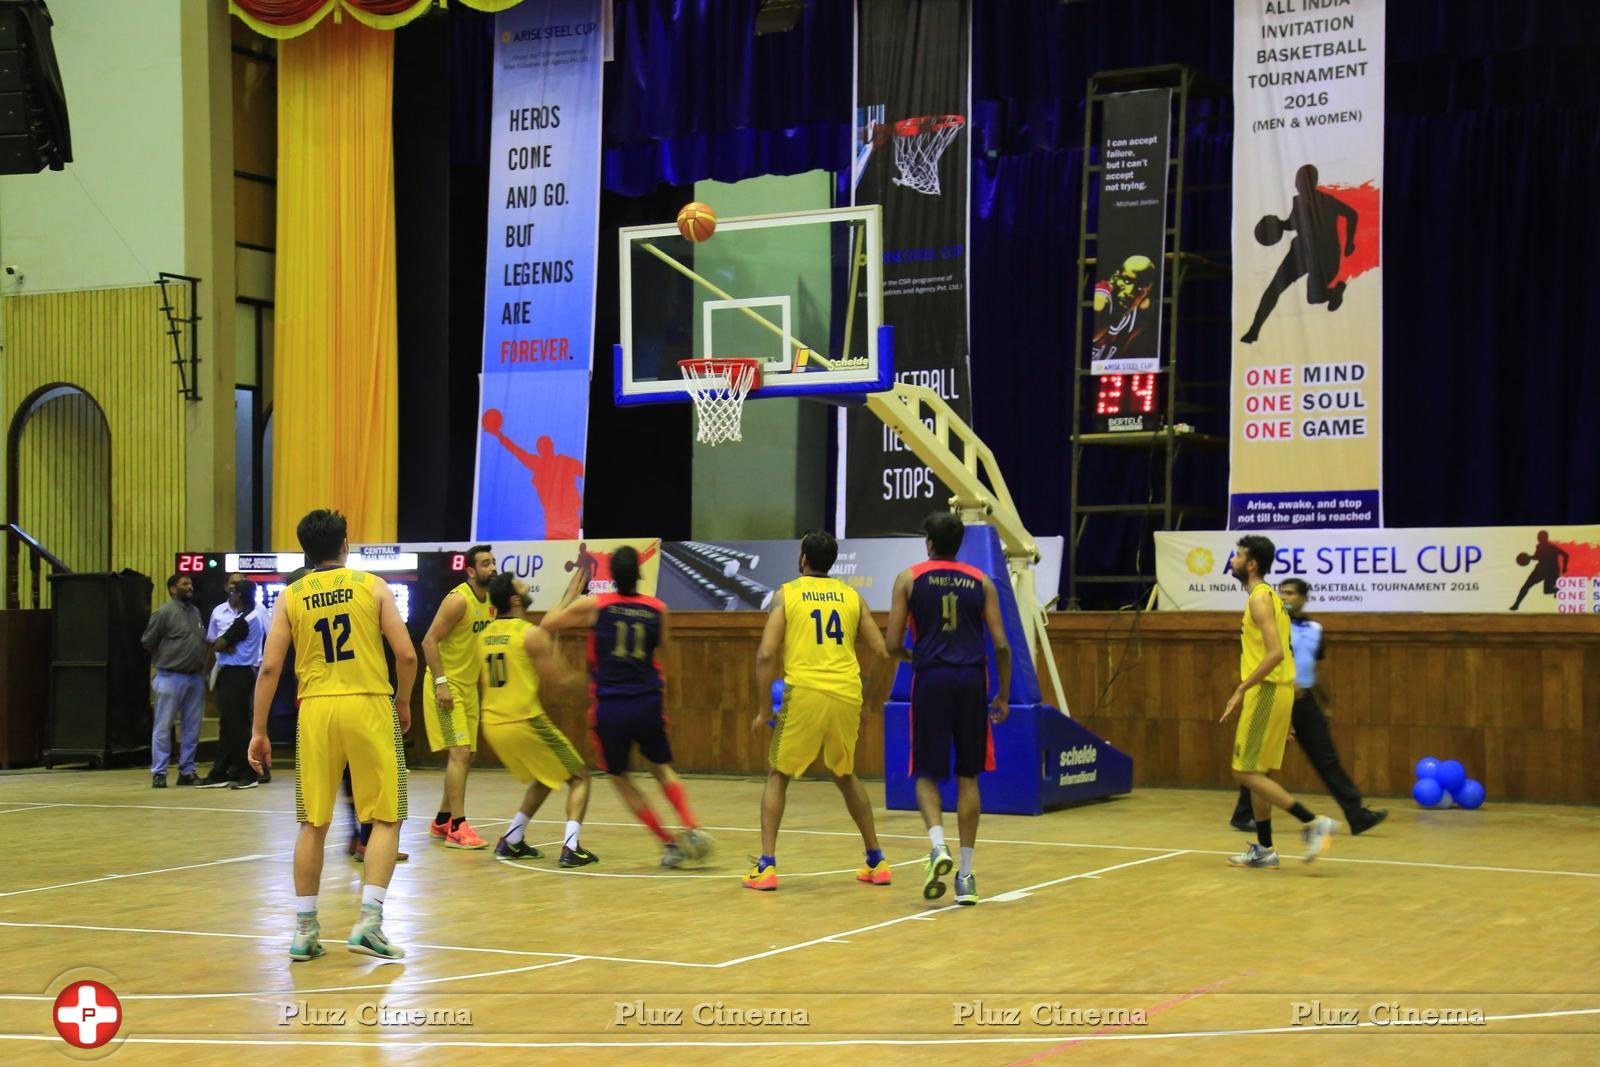 Arise Steel Cup All India Invitation Basketball Tournament 2016 Stills | Picture 1283656